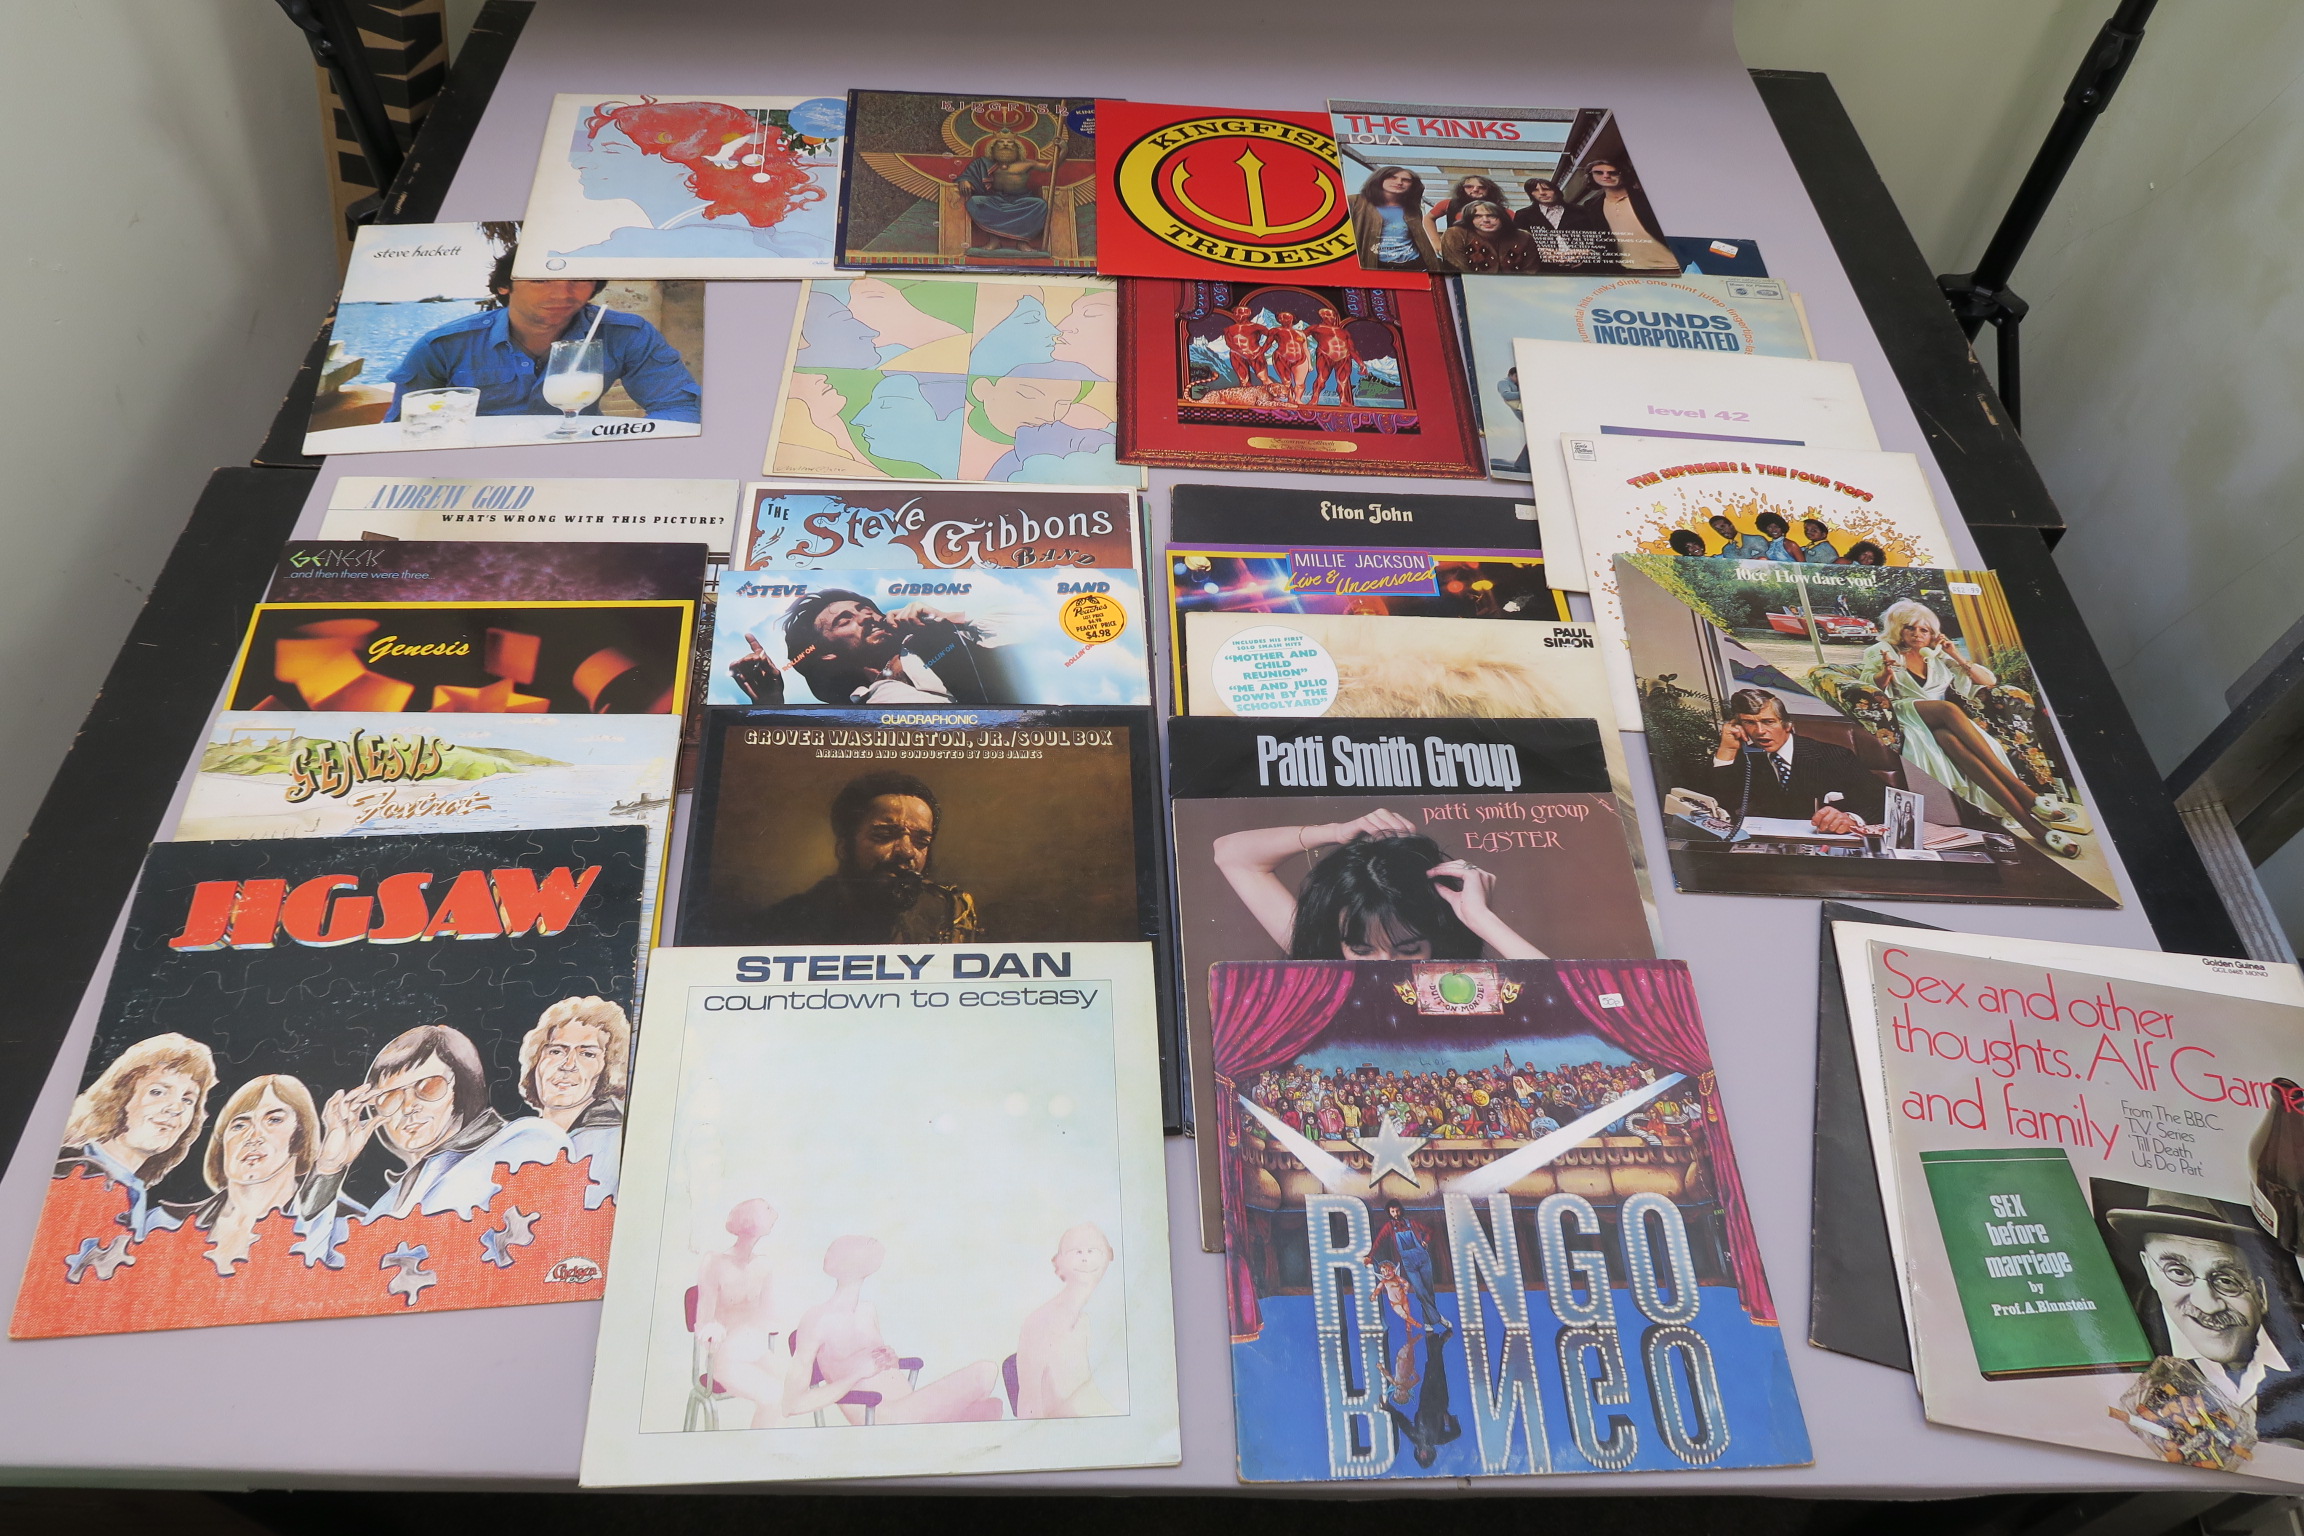 LP collection including Steve Gibbons Band, Genesis, Paul Simon, Patty Smith, Quadrophonic Griver